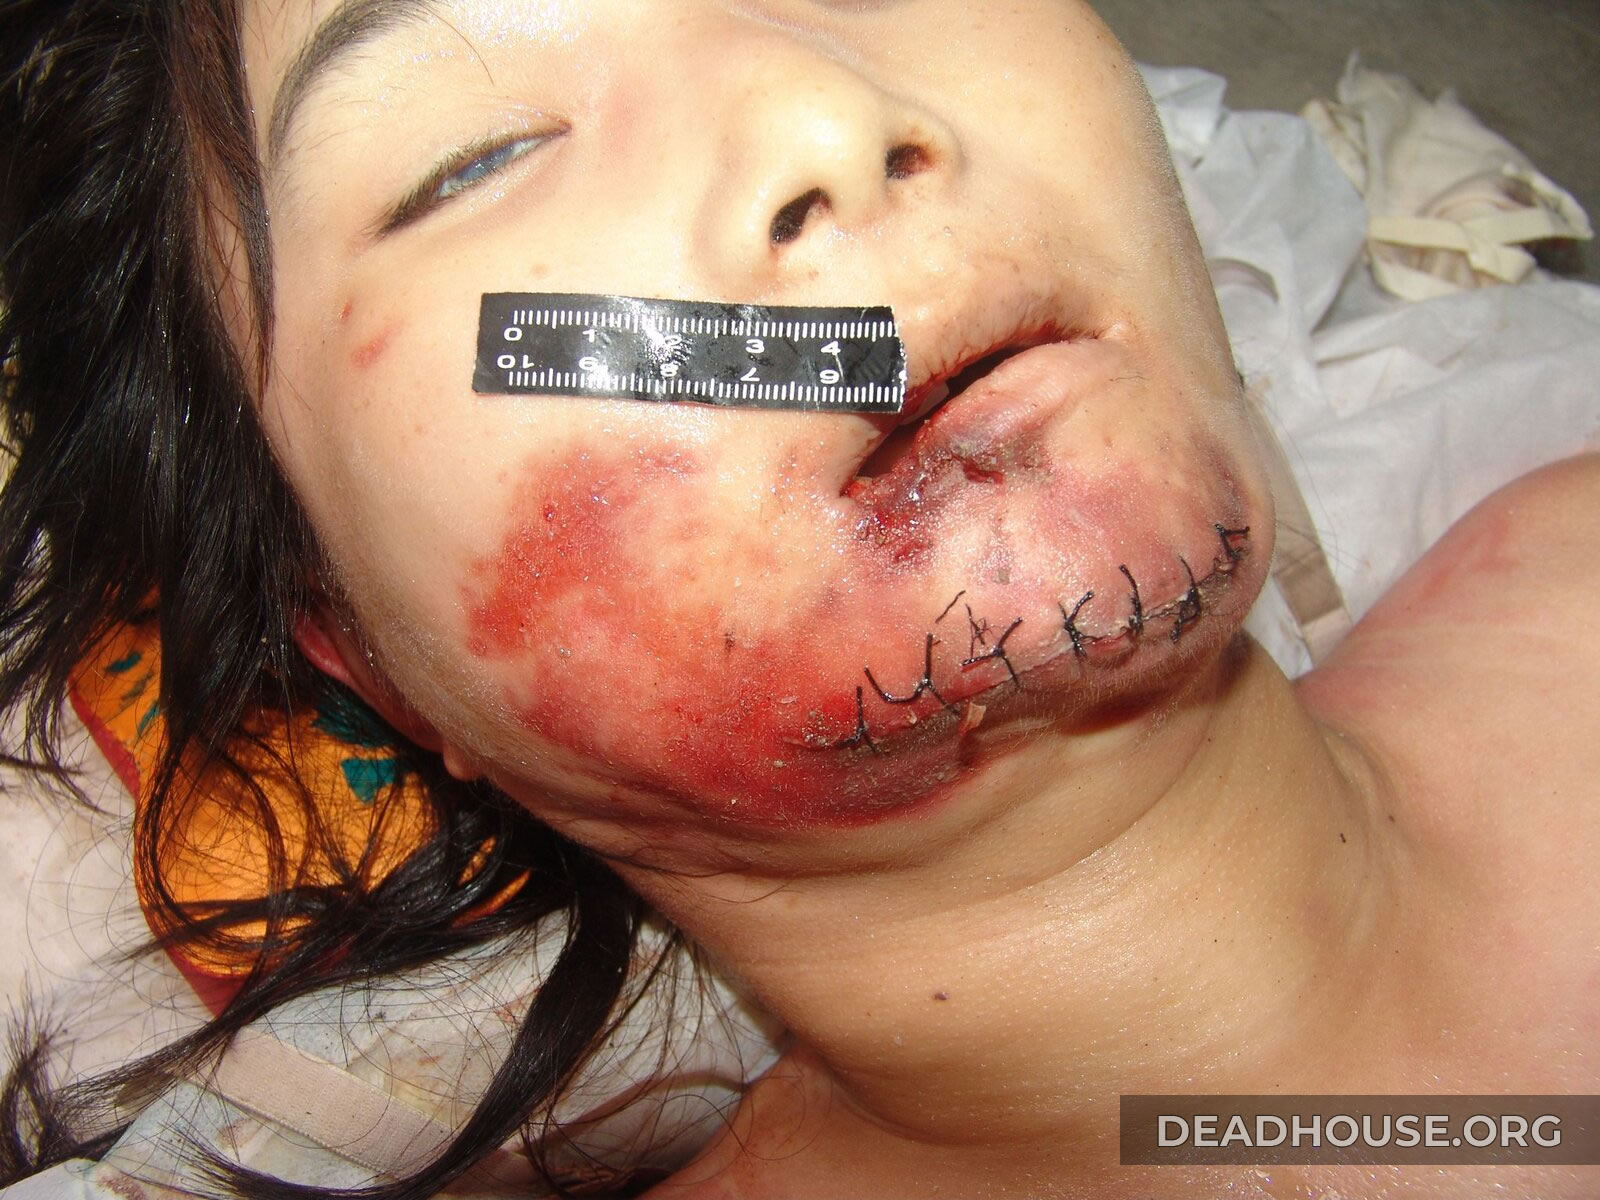 Bruises and trauma to the chin on the face of a dead girl